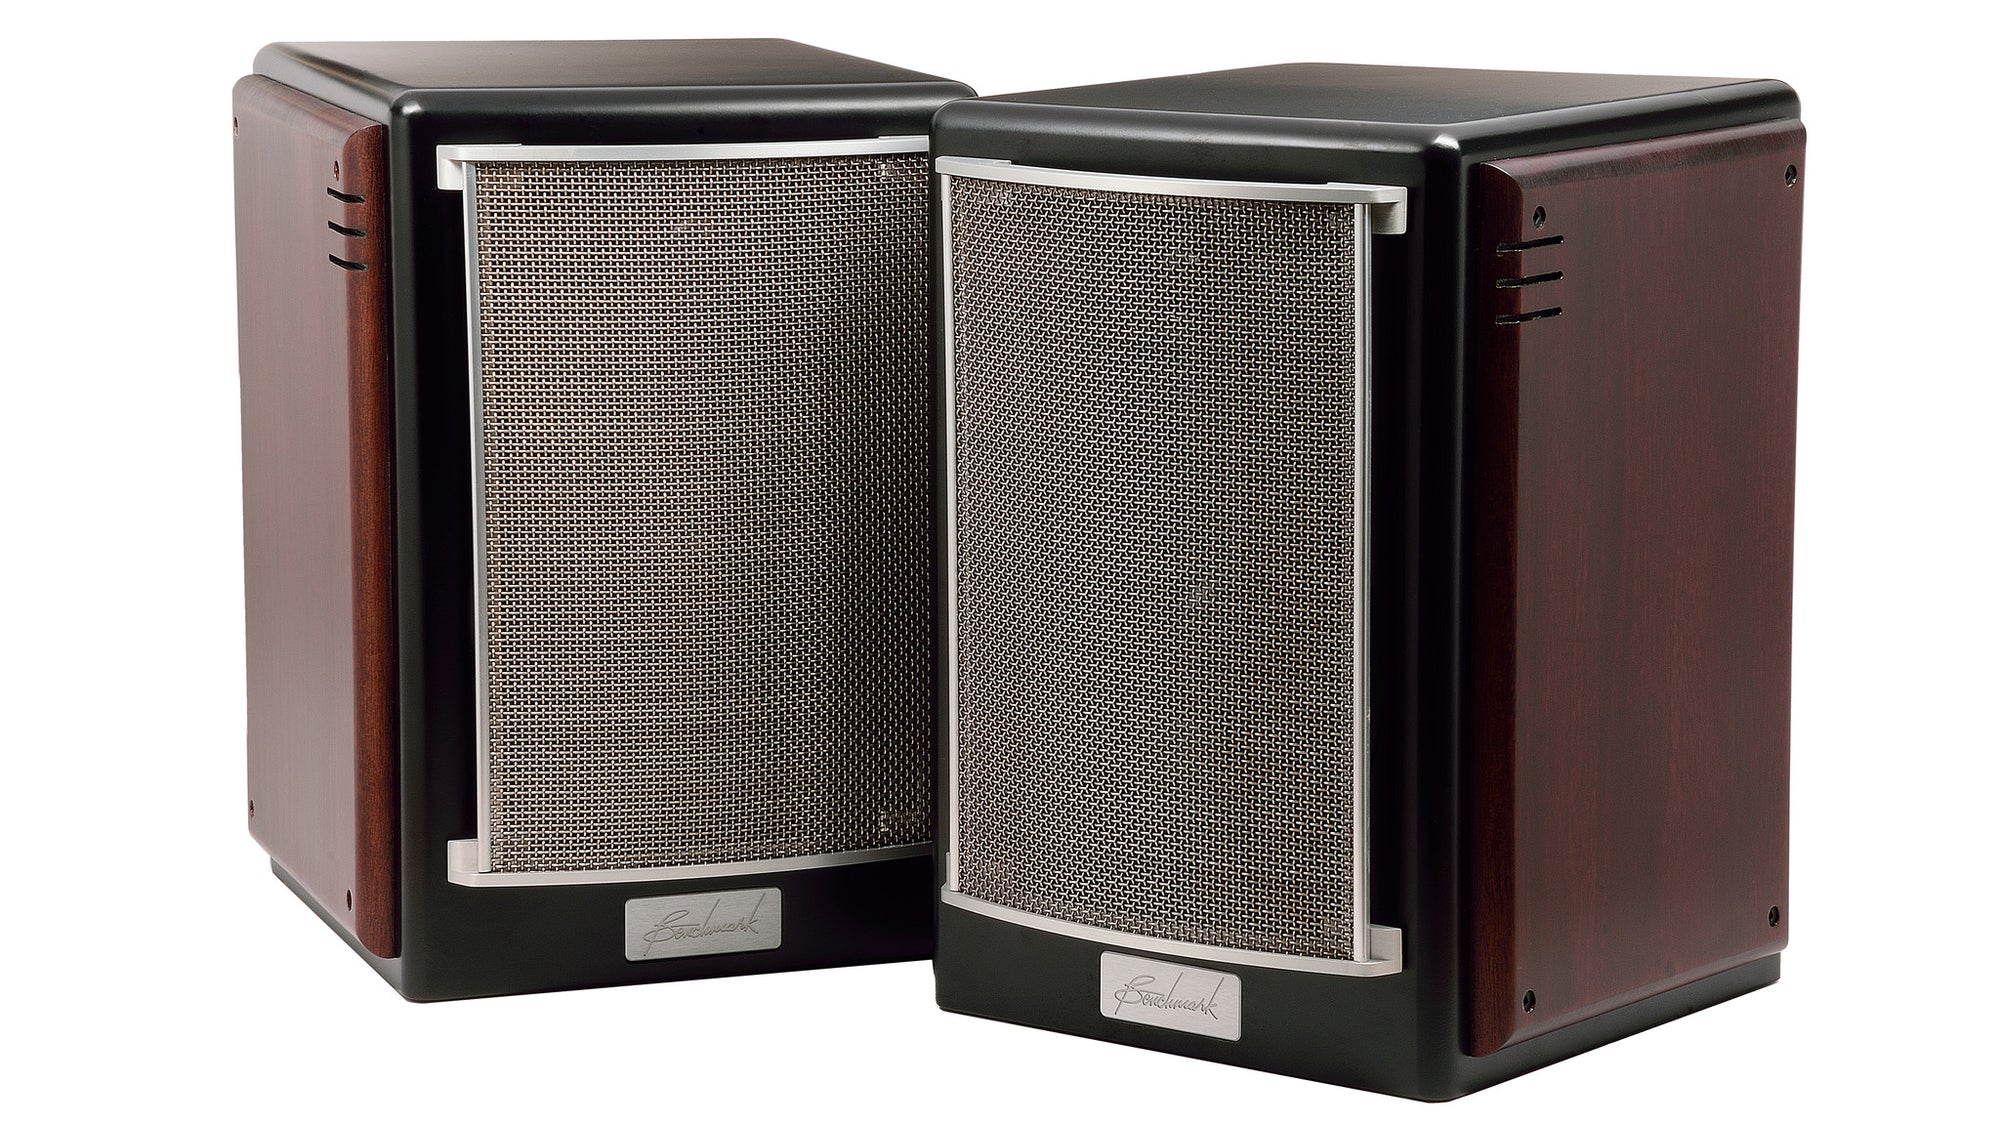 Benchmark SMS1 Loudspeakers - Discontinued